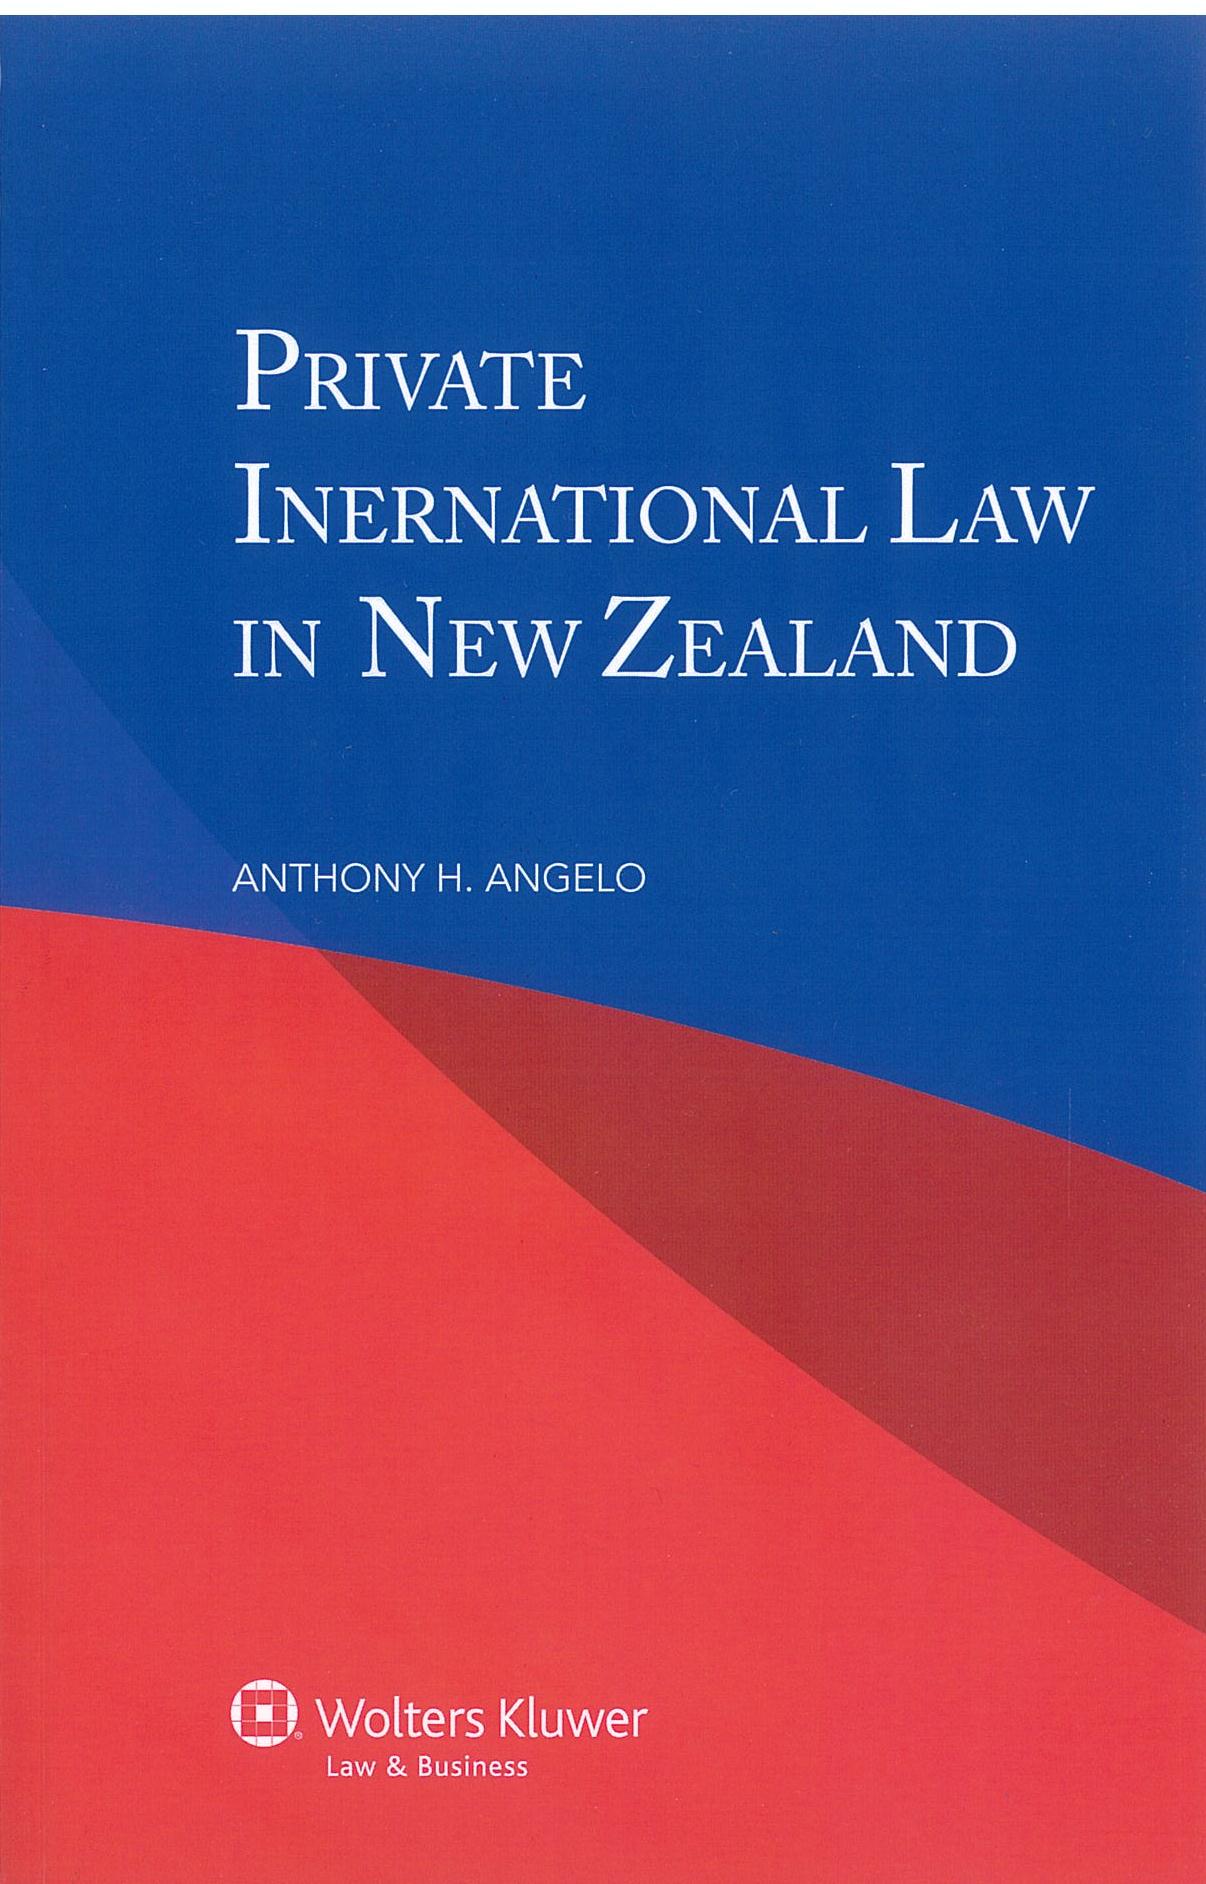 private-international-law-in-nz